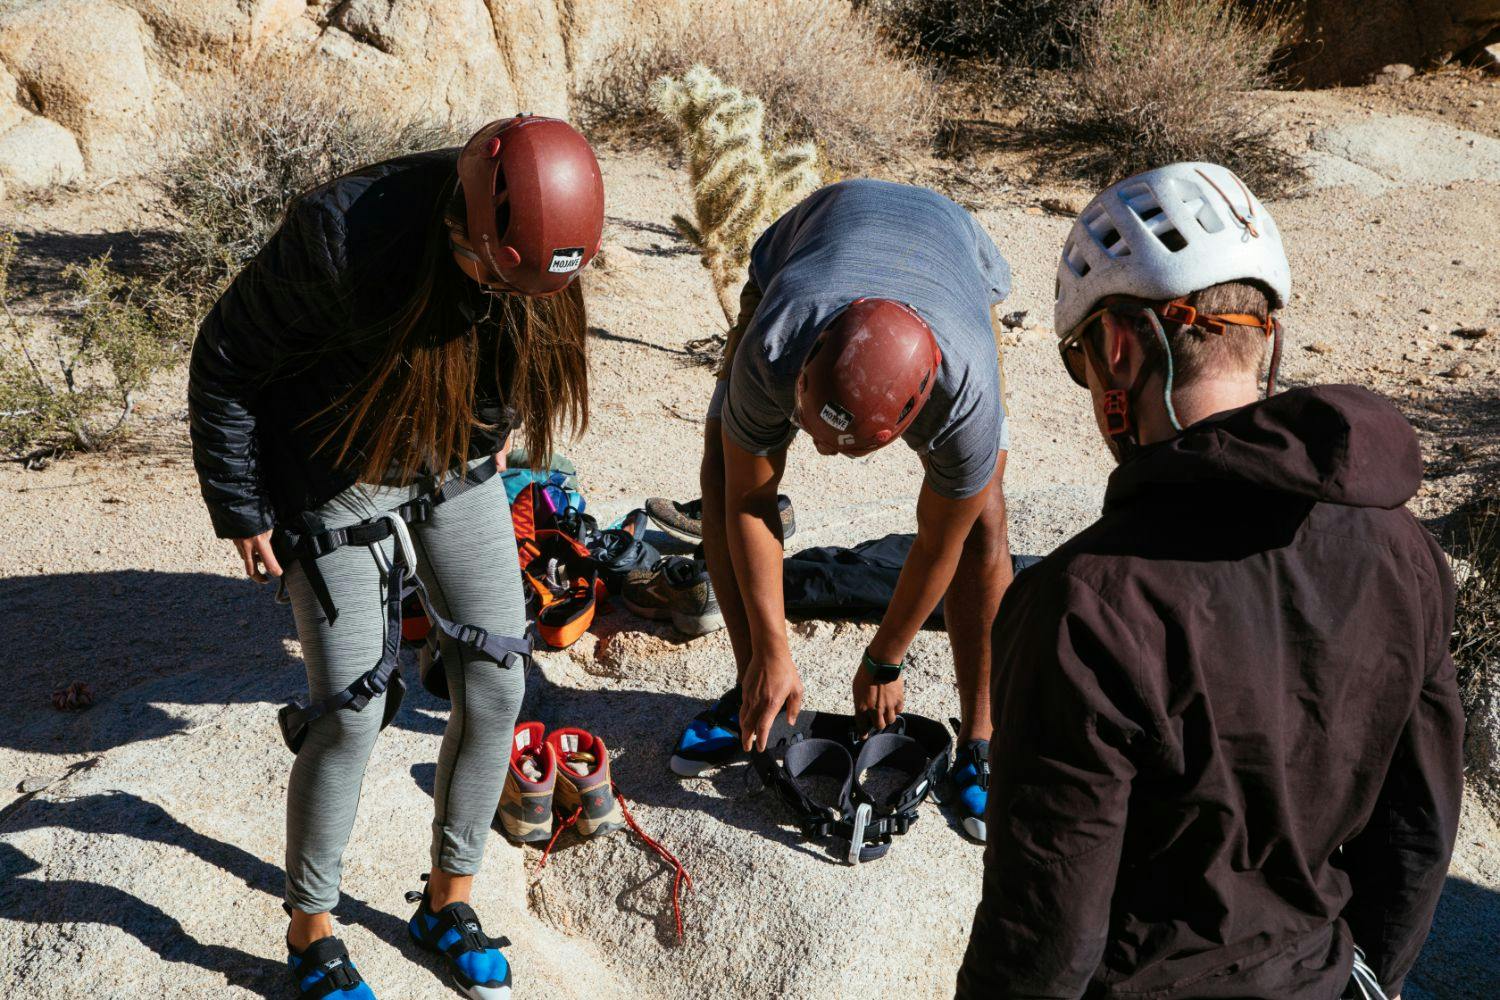 three people getting ready for an activity